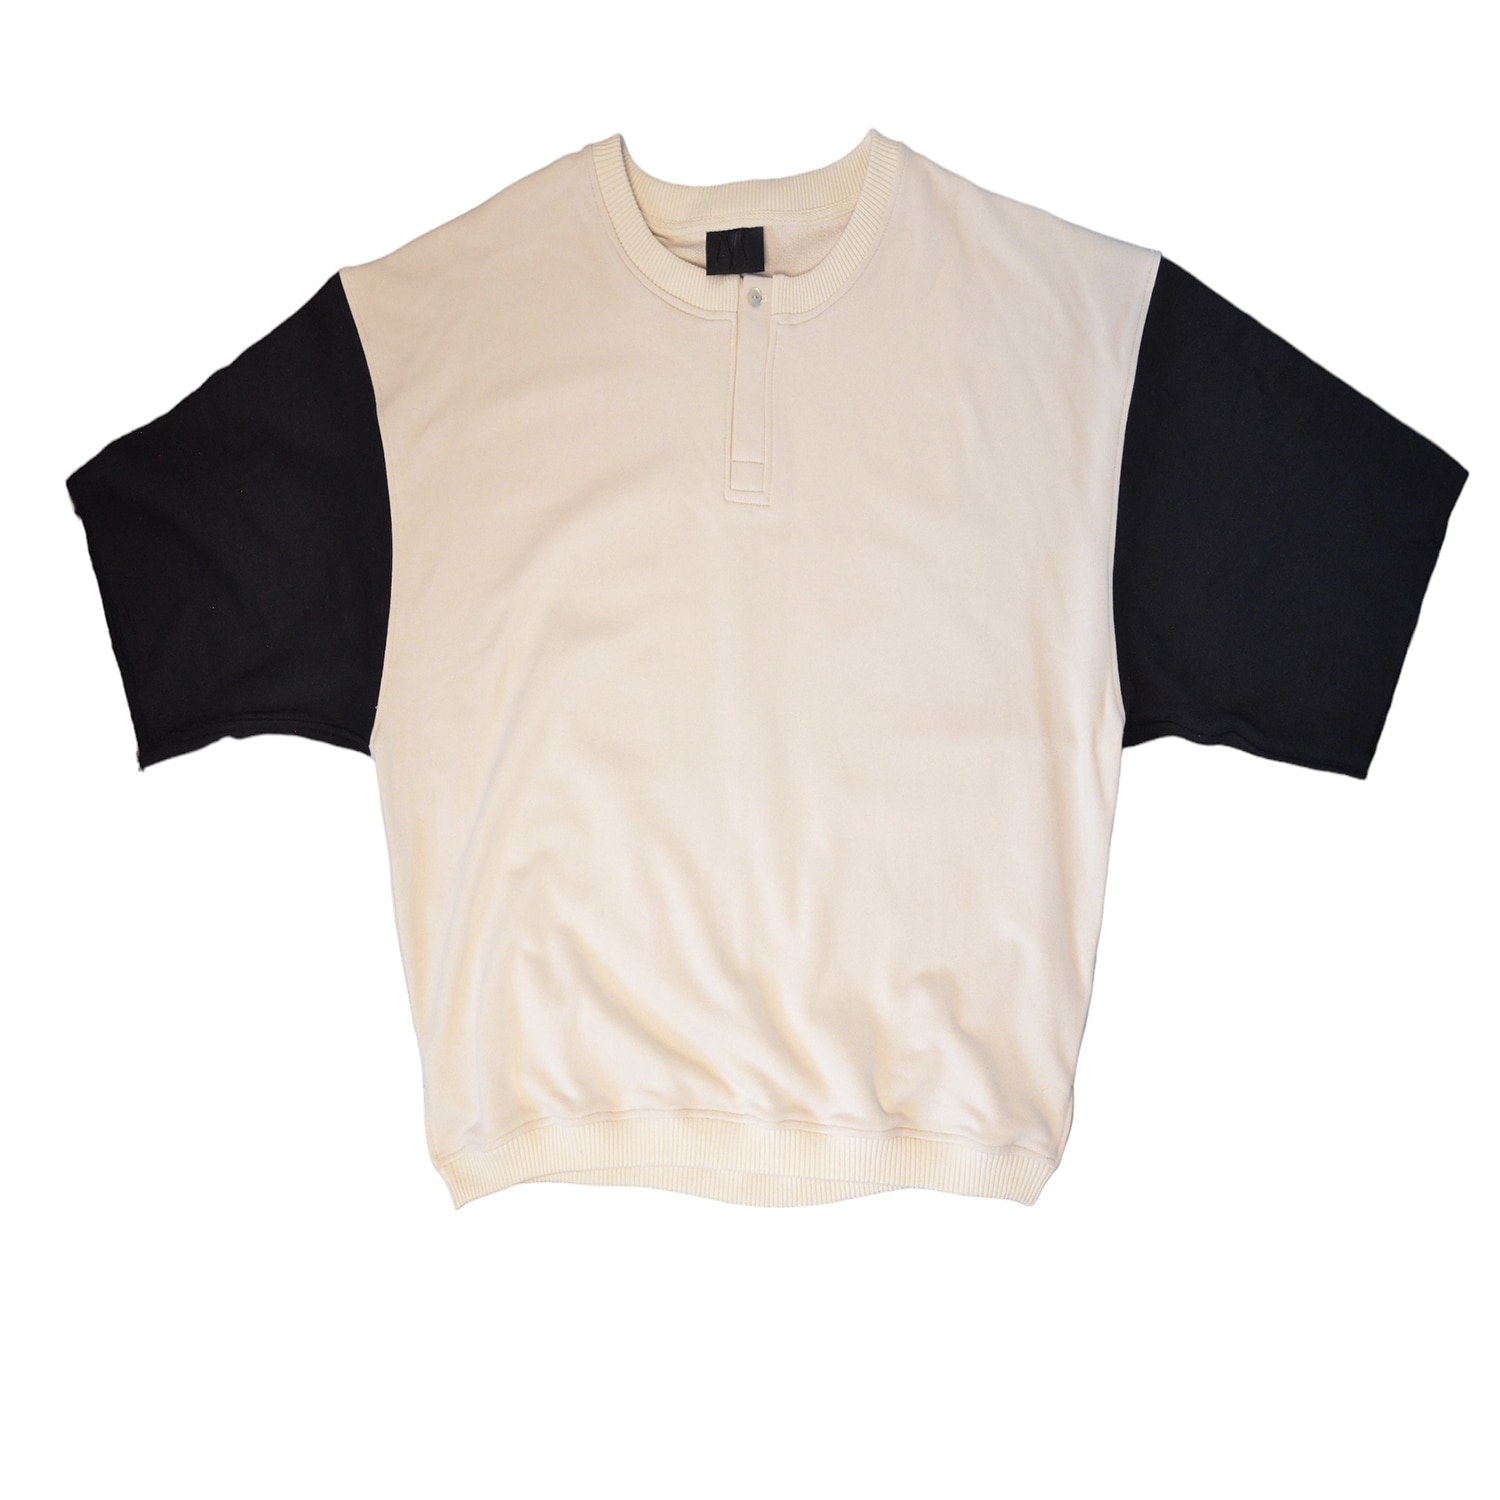 Black / Neutrals Three Quarter Contrast Sleeve Henley Sweatshirt With Cropped Body In Cream And Black Extra Large Mantle 2020